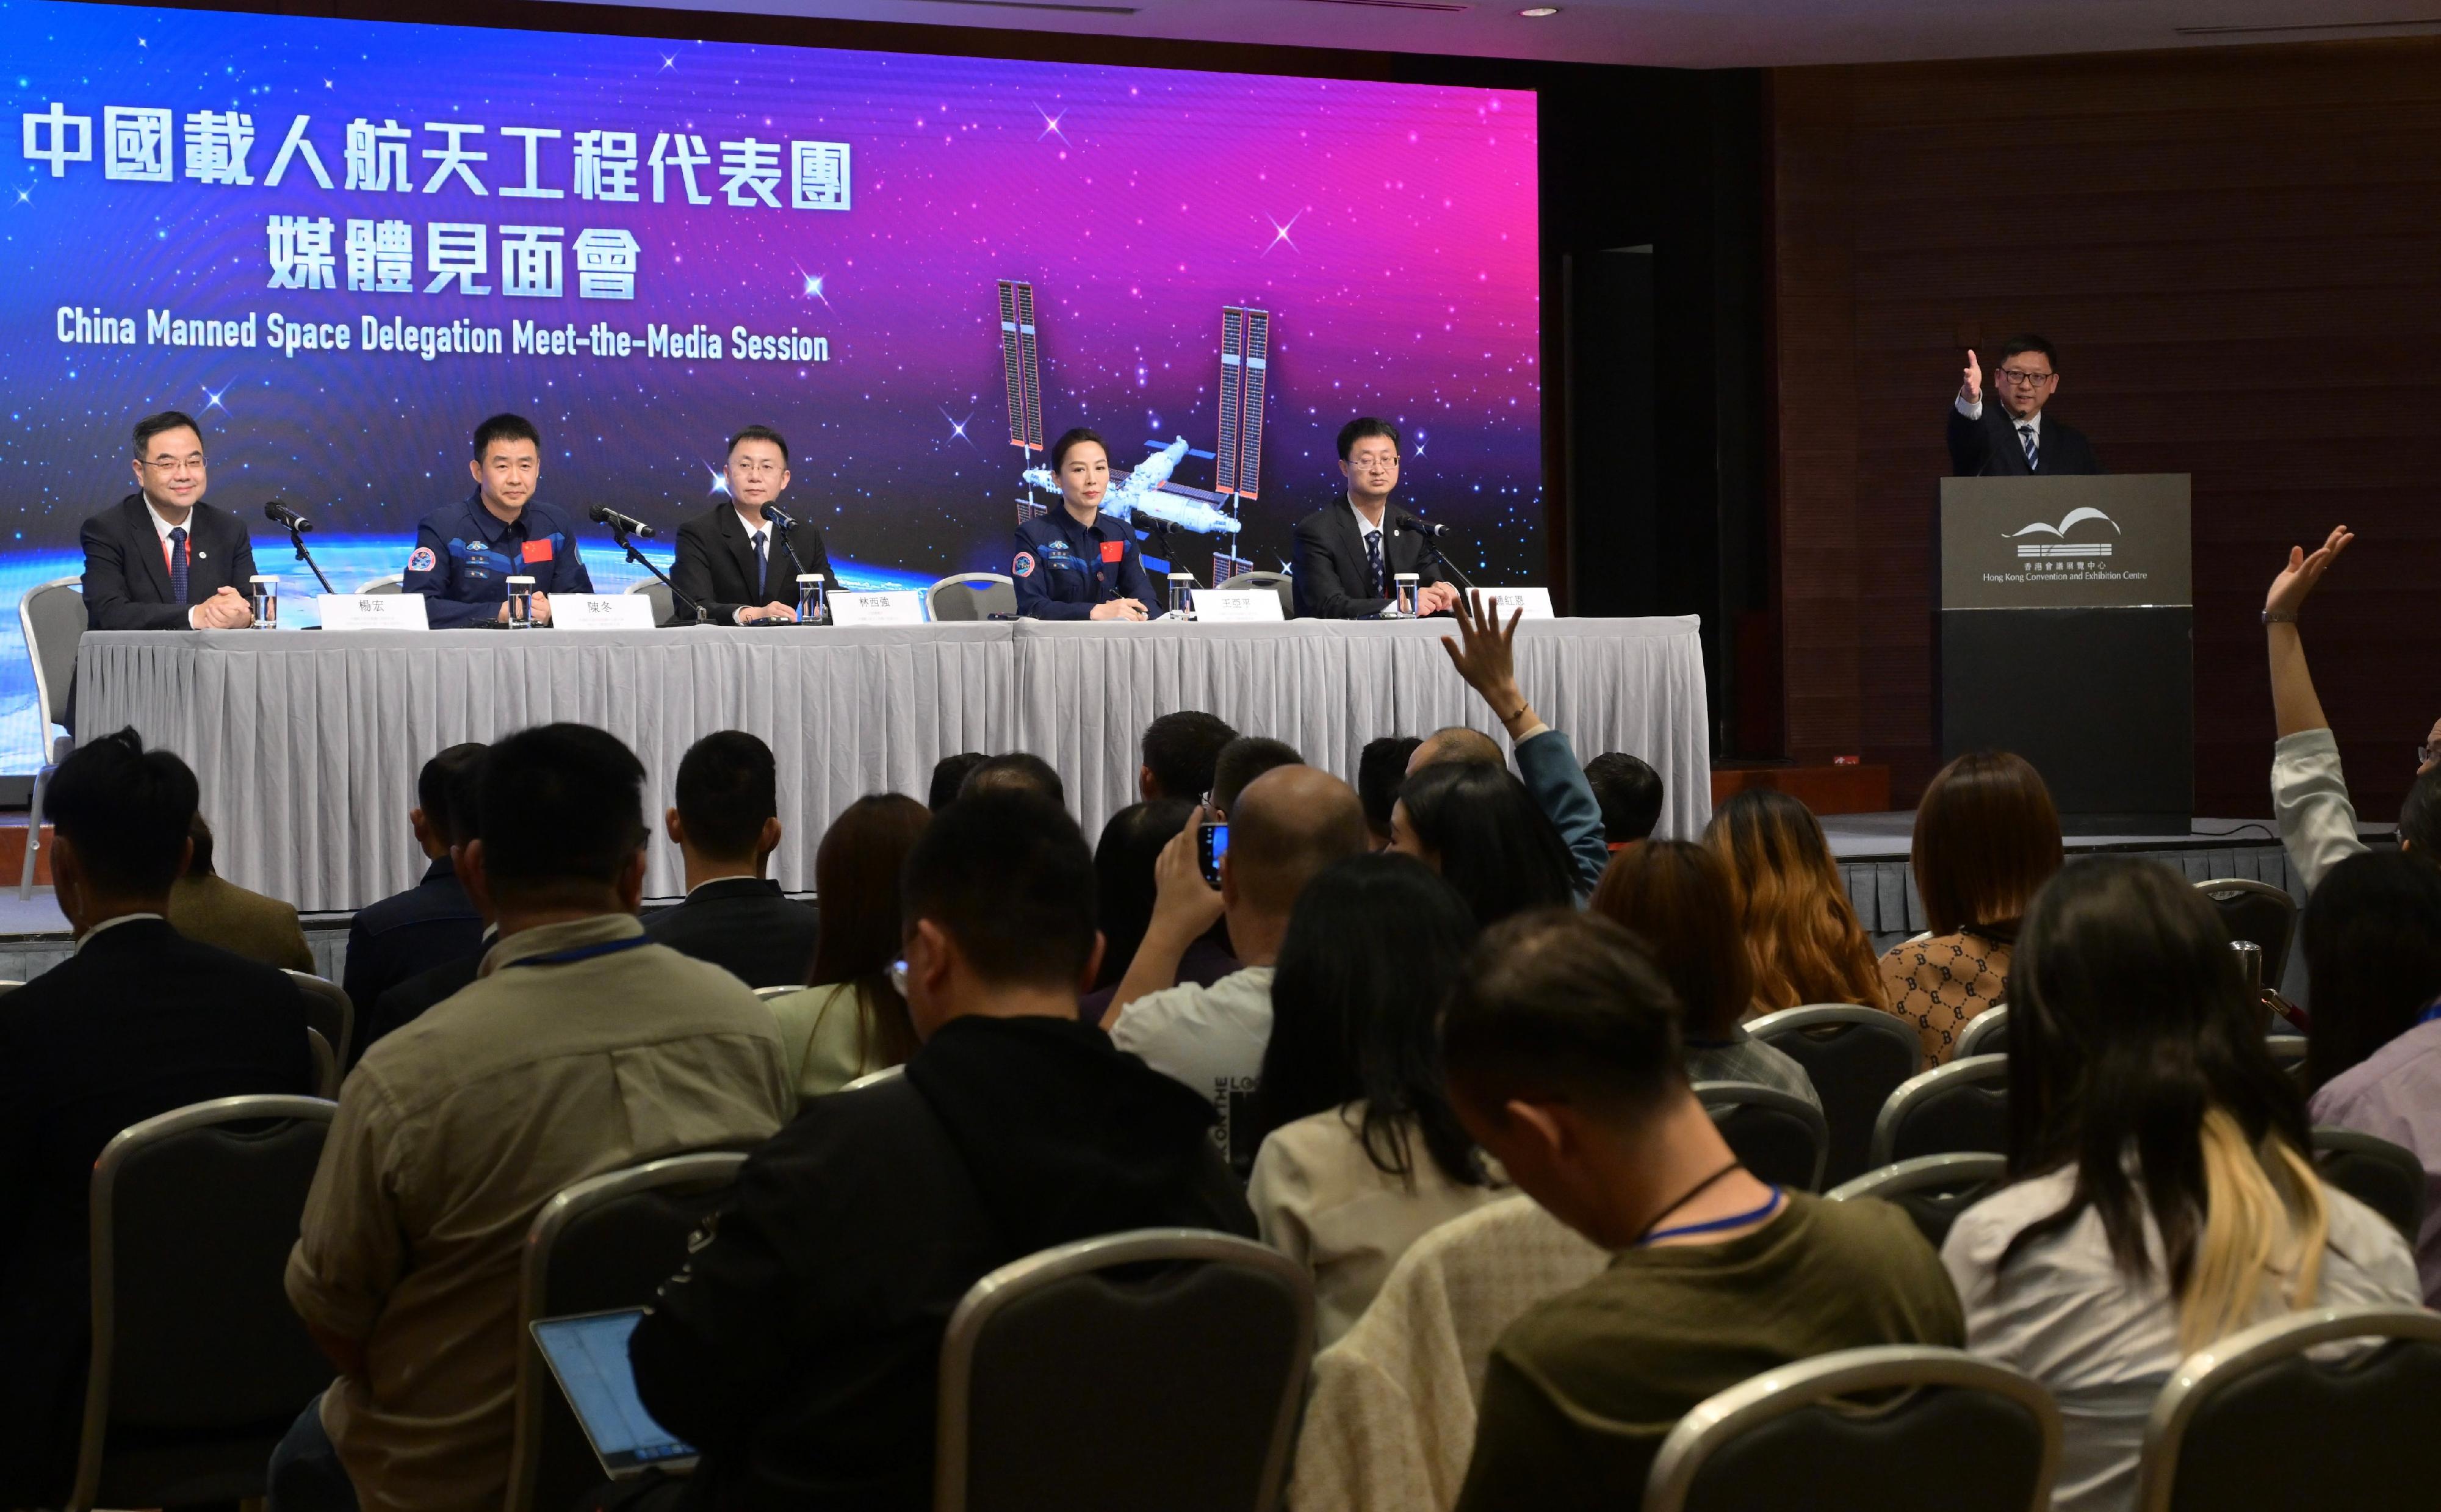 A China Manned Space delegation arrived in Hong Kong today (November 28) for a four-day visit. Photo shows the leader of the delegation and the Deputy Director General of the China Manned Space Agency, Mr Lin Xiqiang (third left), together with members of the delegation, at the meet-the media session.